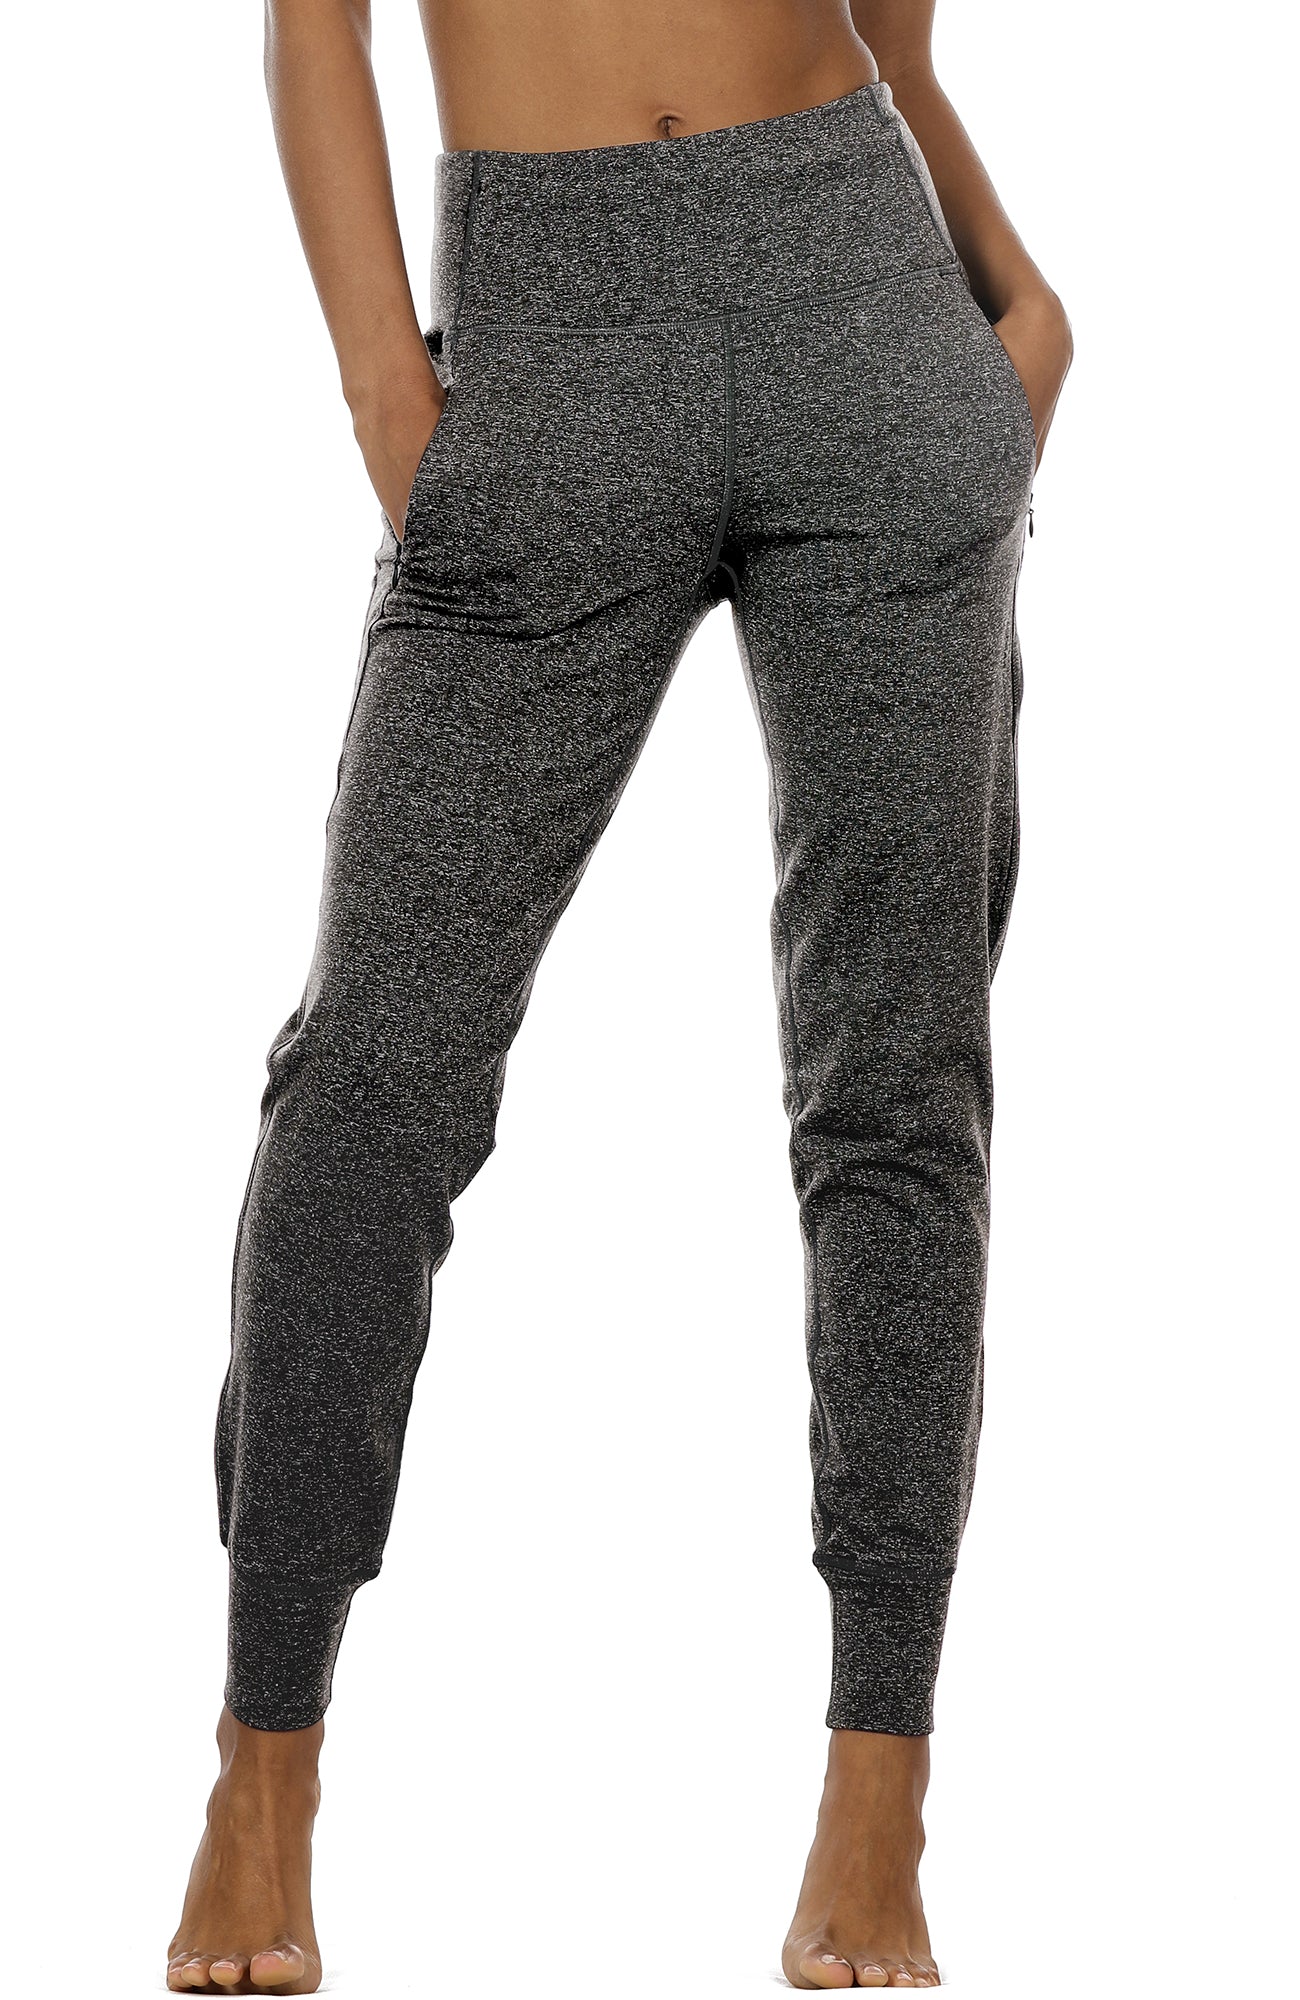 Gray Sweat Pants Men Tummy Control Mens Jeans Yoga Pants with Pockets Plus  Size Leggings with Pockets Activewear Leggings Pack Ripped Wide Leg Jeans  for Girls Workout Bench Comfy Pants Women Work